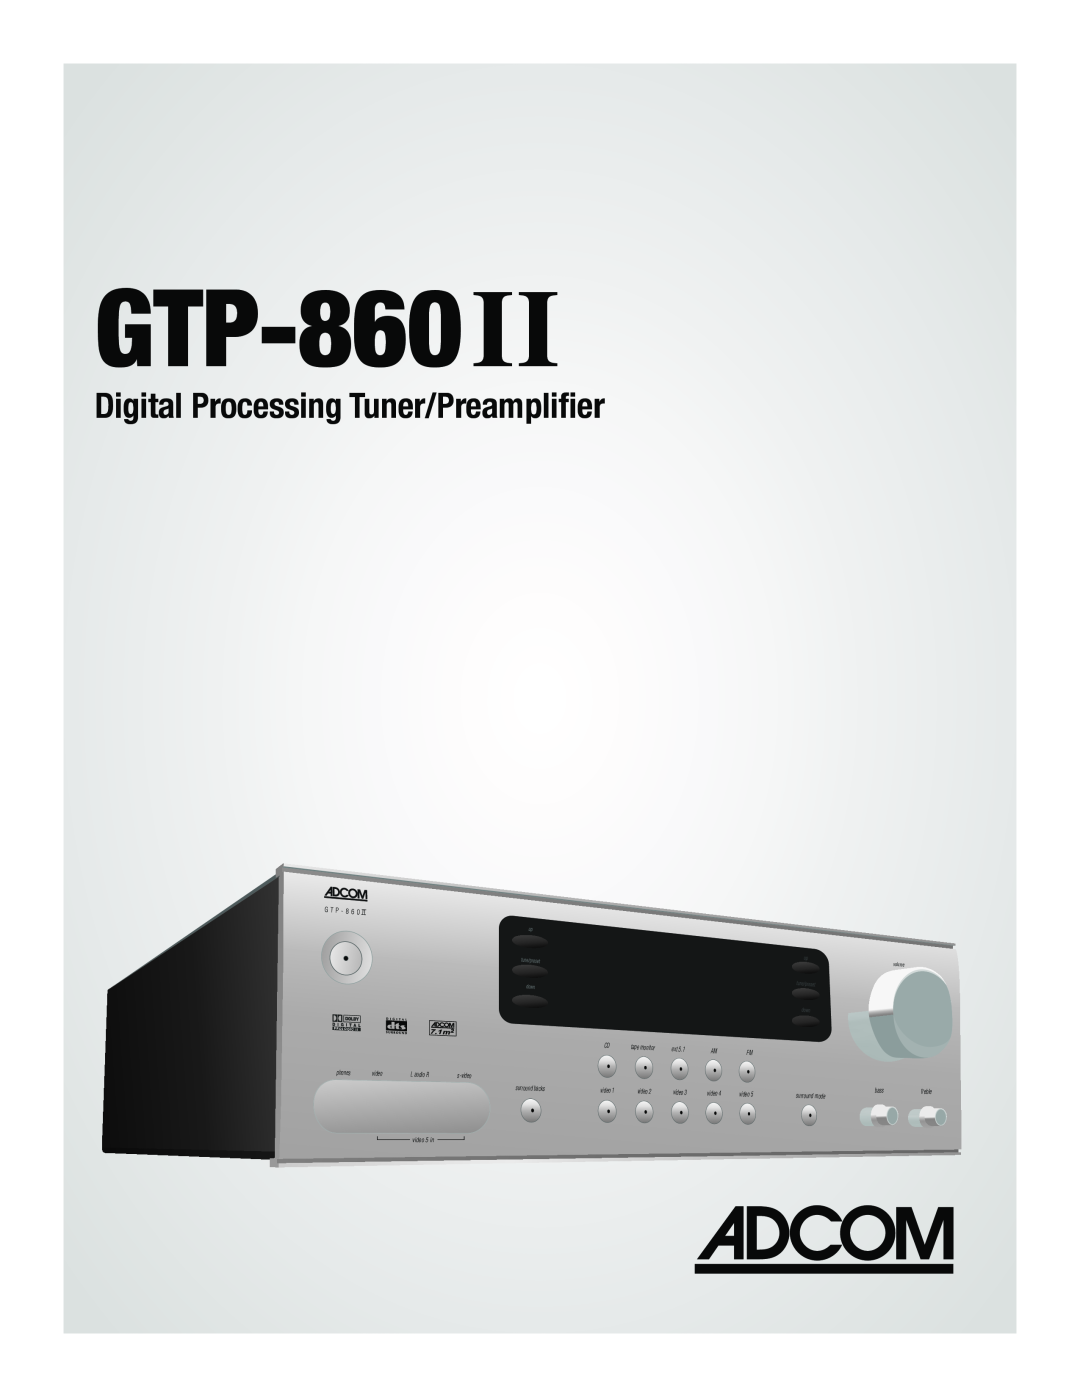 Adcom GTP-860II manual Digital Processing Tuner/Preamplifier, G T P, surround backs, video3, video4, video5 